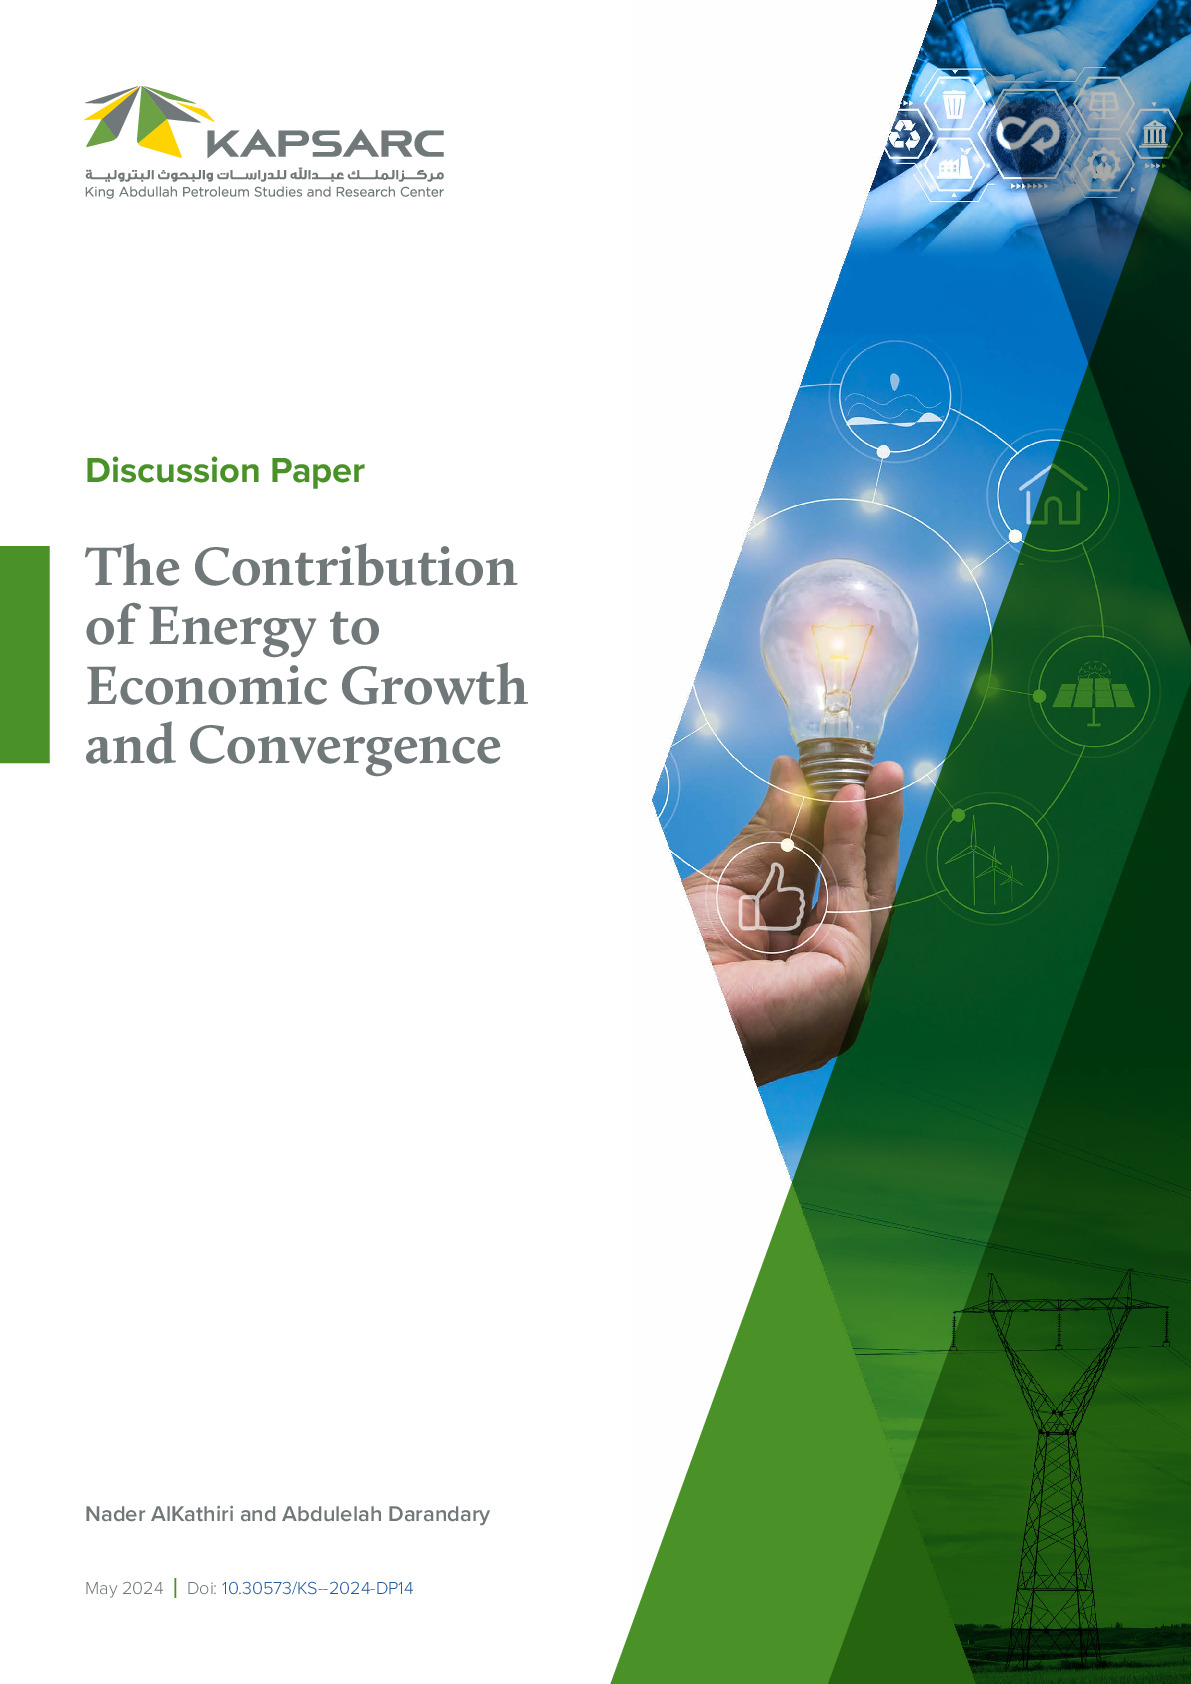 The Contribution of Energy to Economic Growth and Convergence